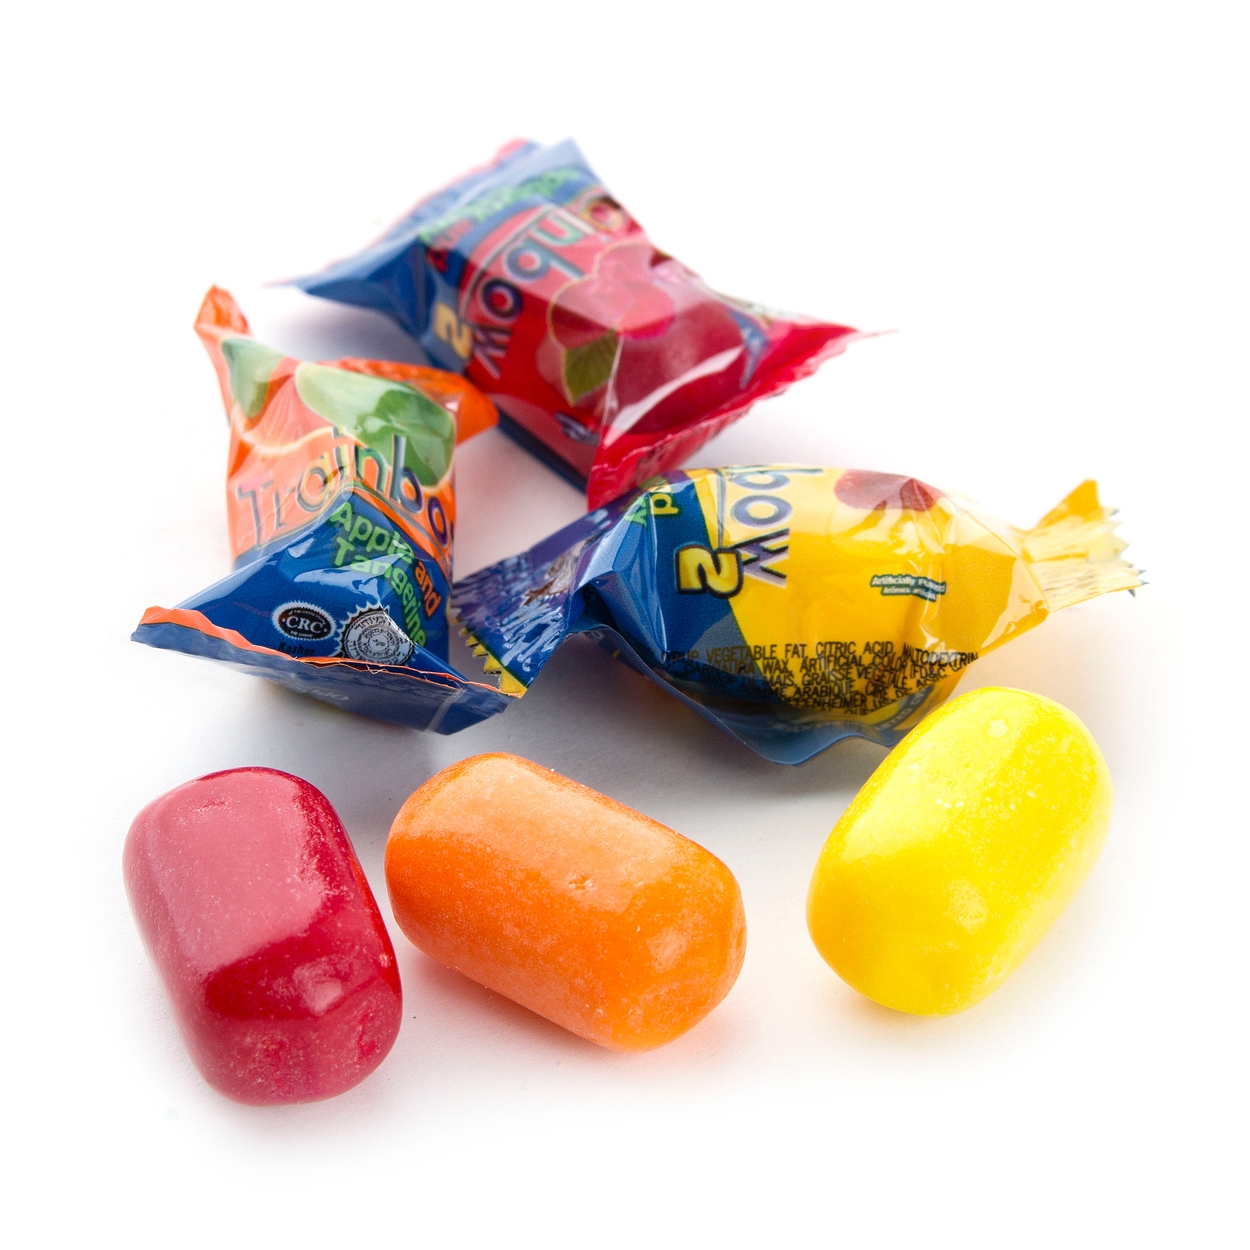 Zaza Assorted Chewy Filled Candy - 26.45 oz Bag • Wrapped Candy • Bulk ...